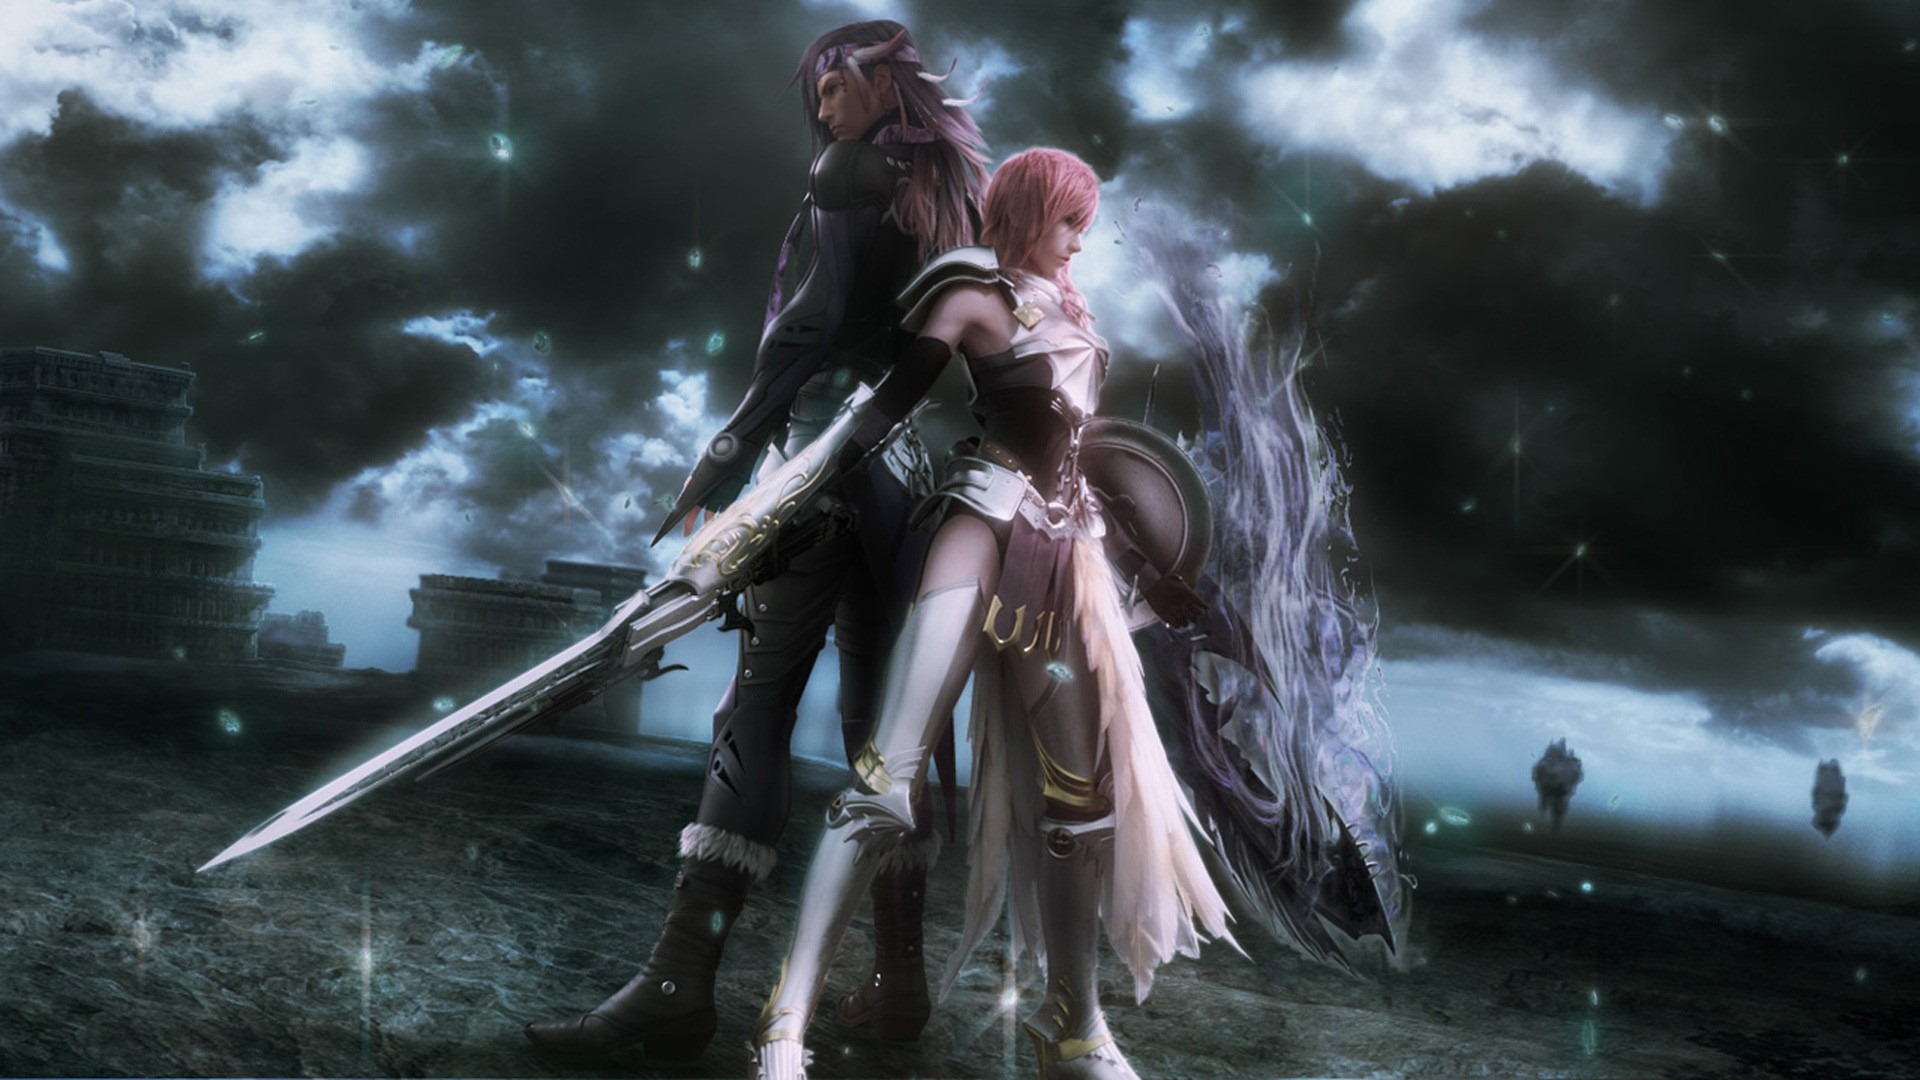 Final Fantasy XIII-2 Wallpapers | Free Downloads | inMotion Gaming